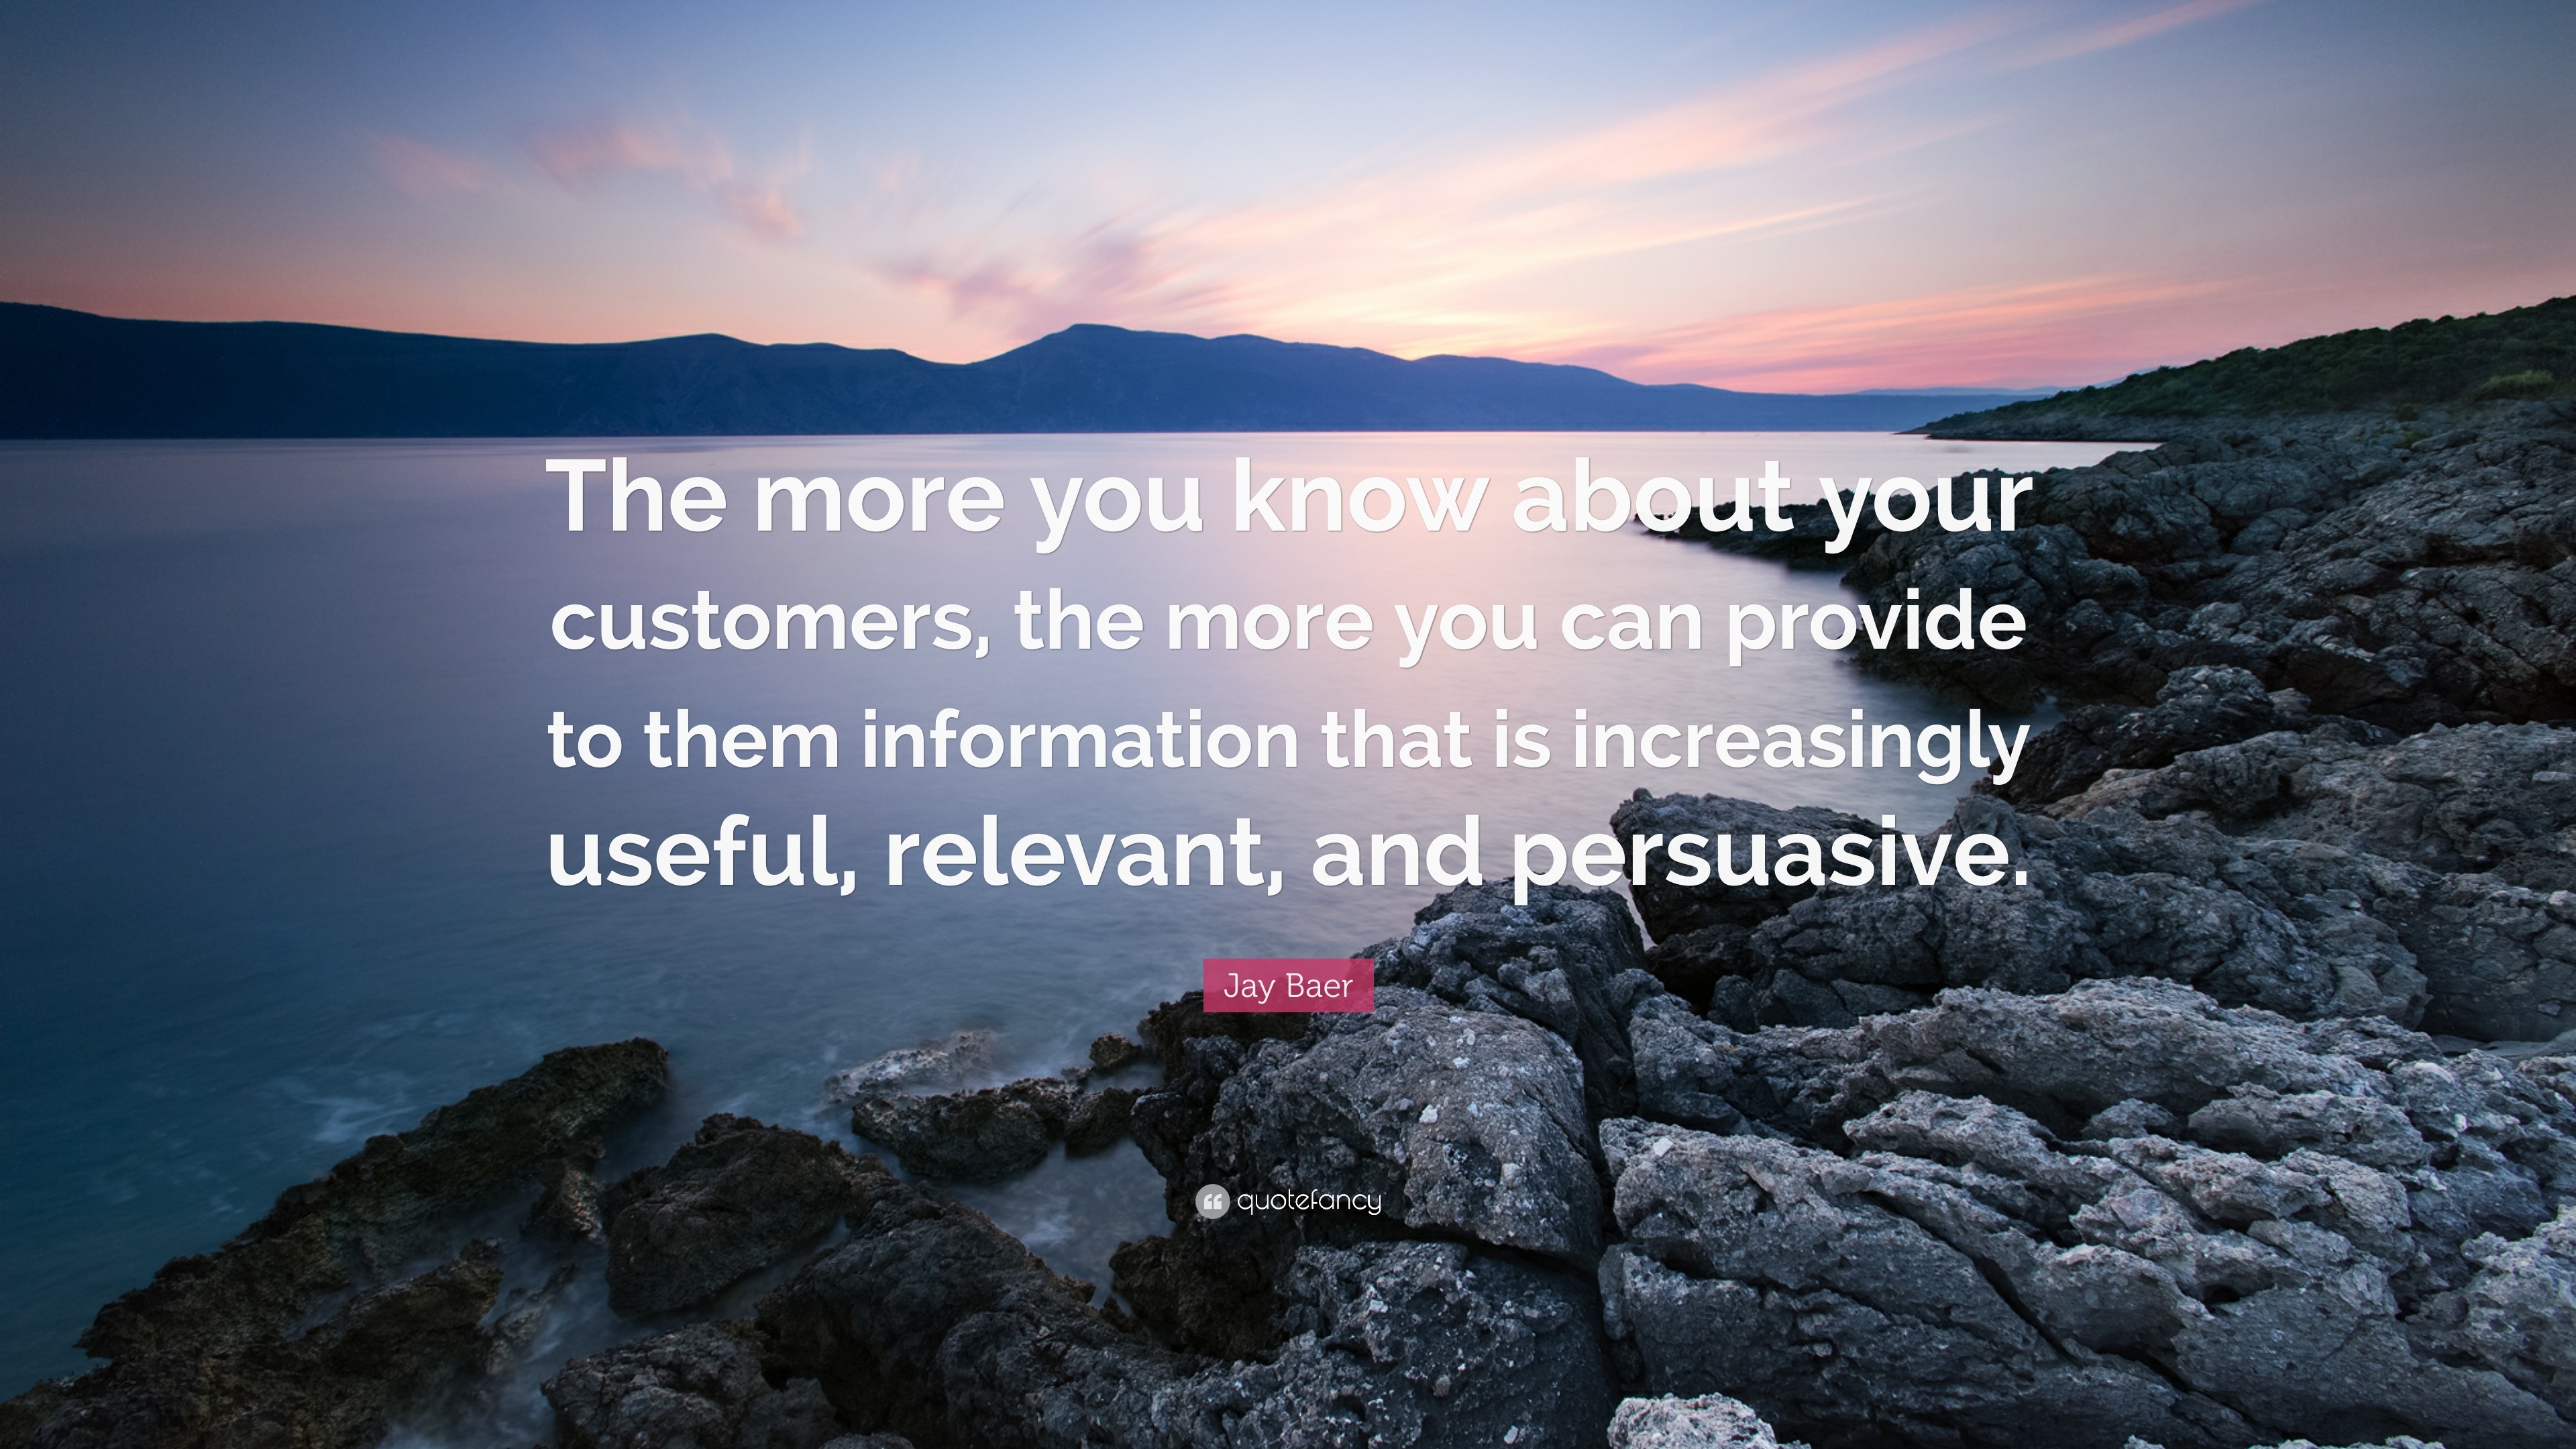 Jay Baer Quote: “The more you know about your customers, the more you ...